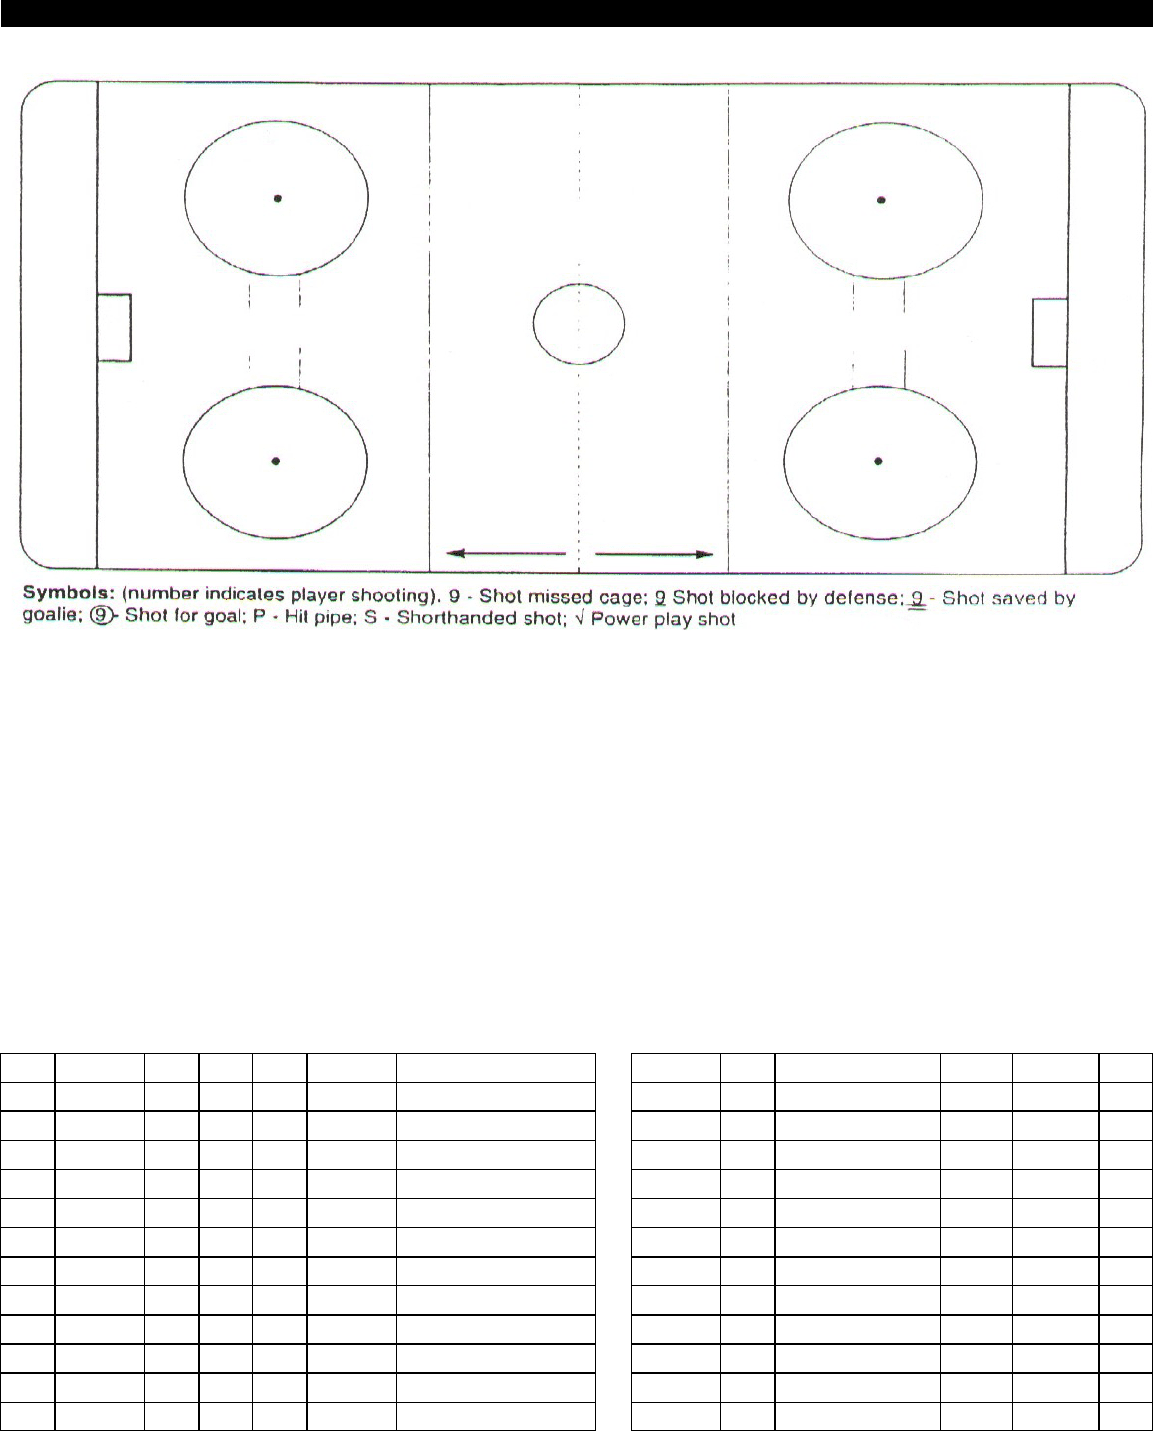 hockey-shot-chart-scoring-summary-template-in-word-and-pdf-formats